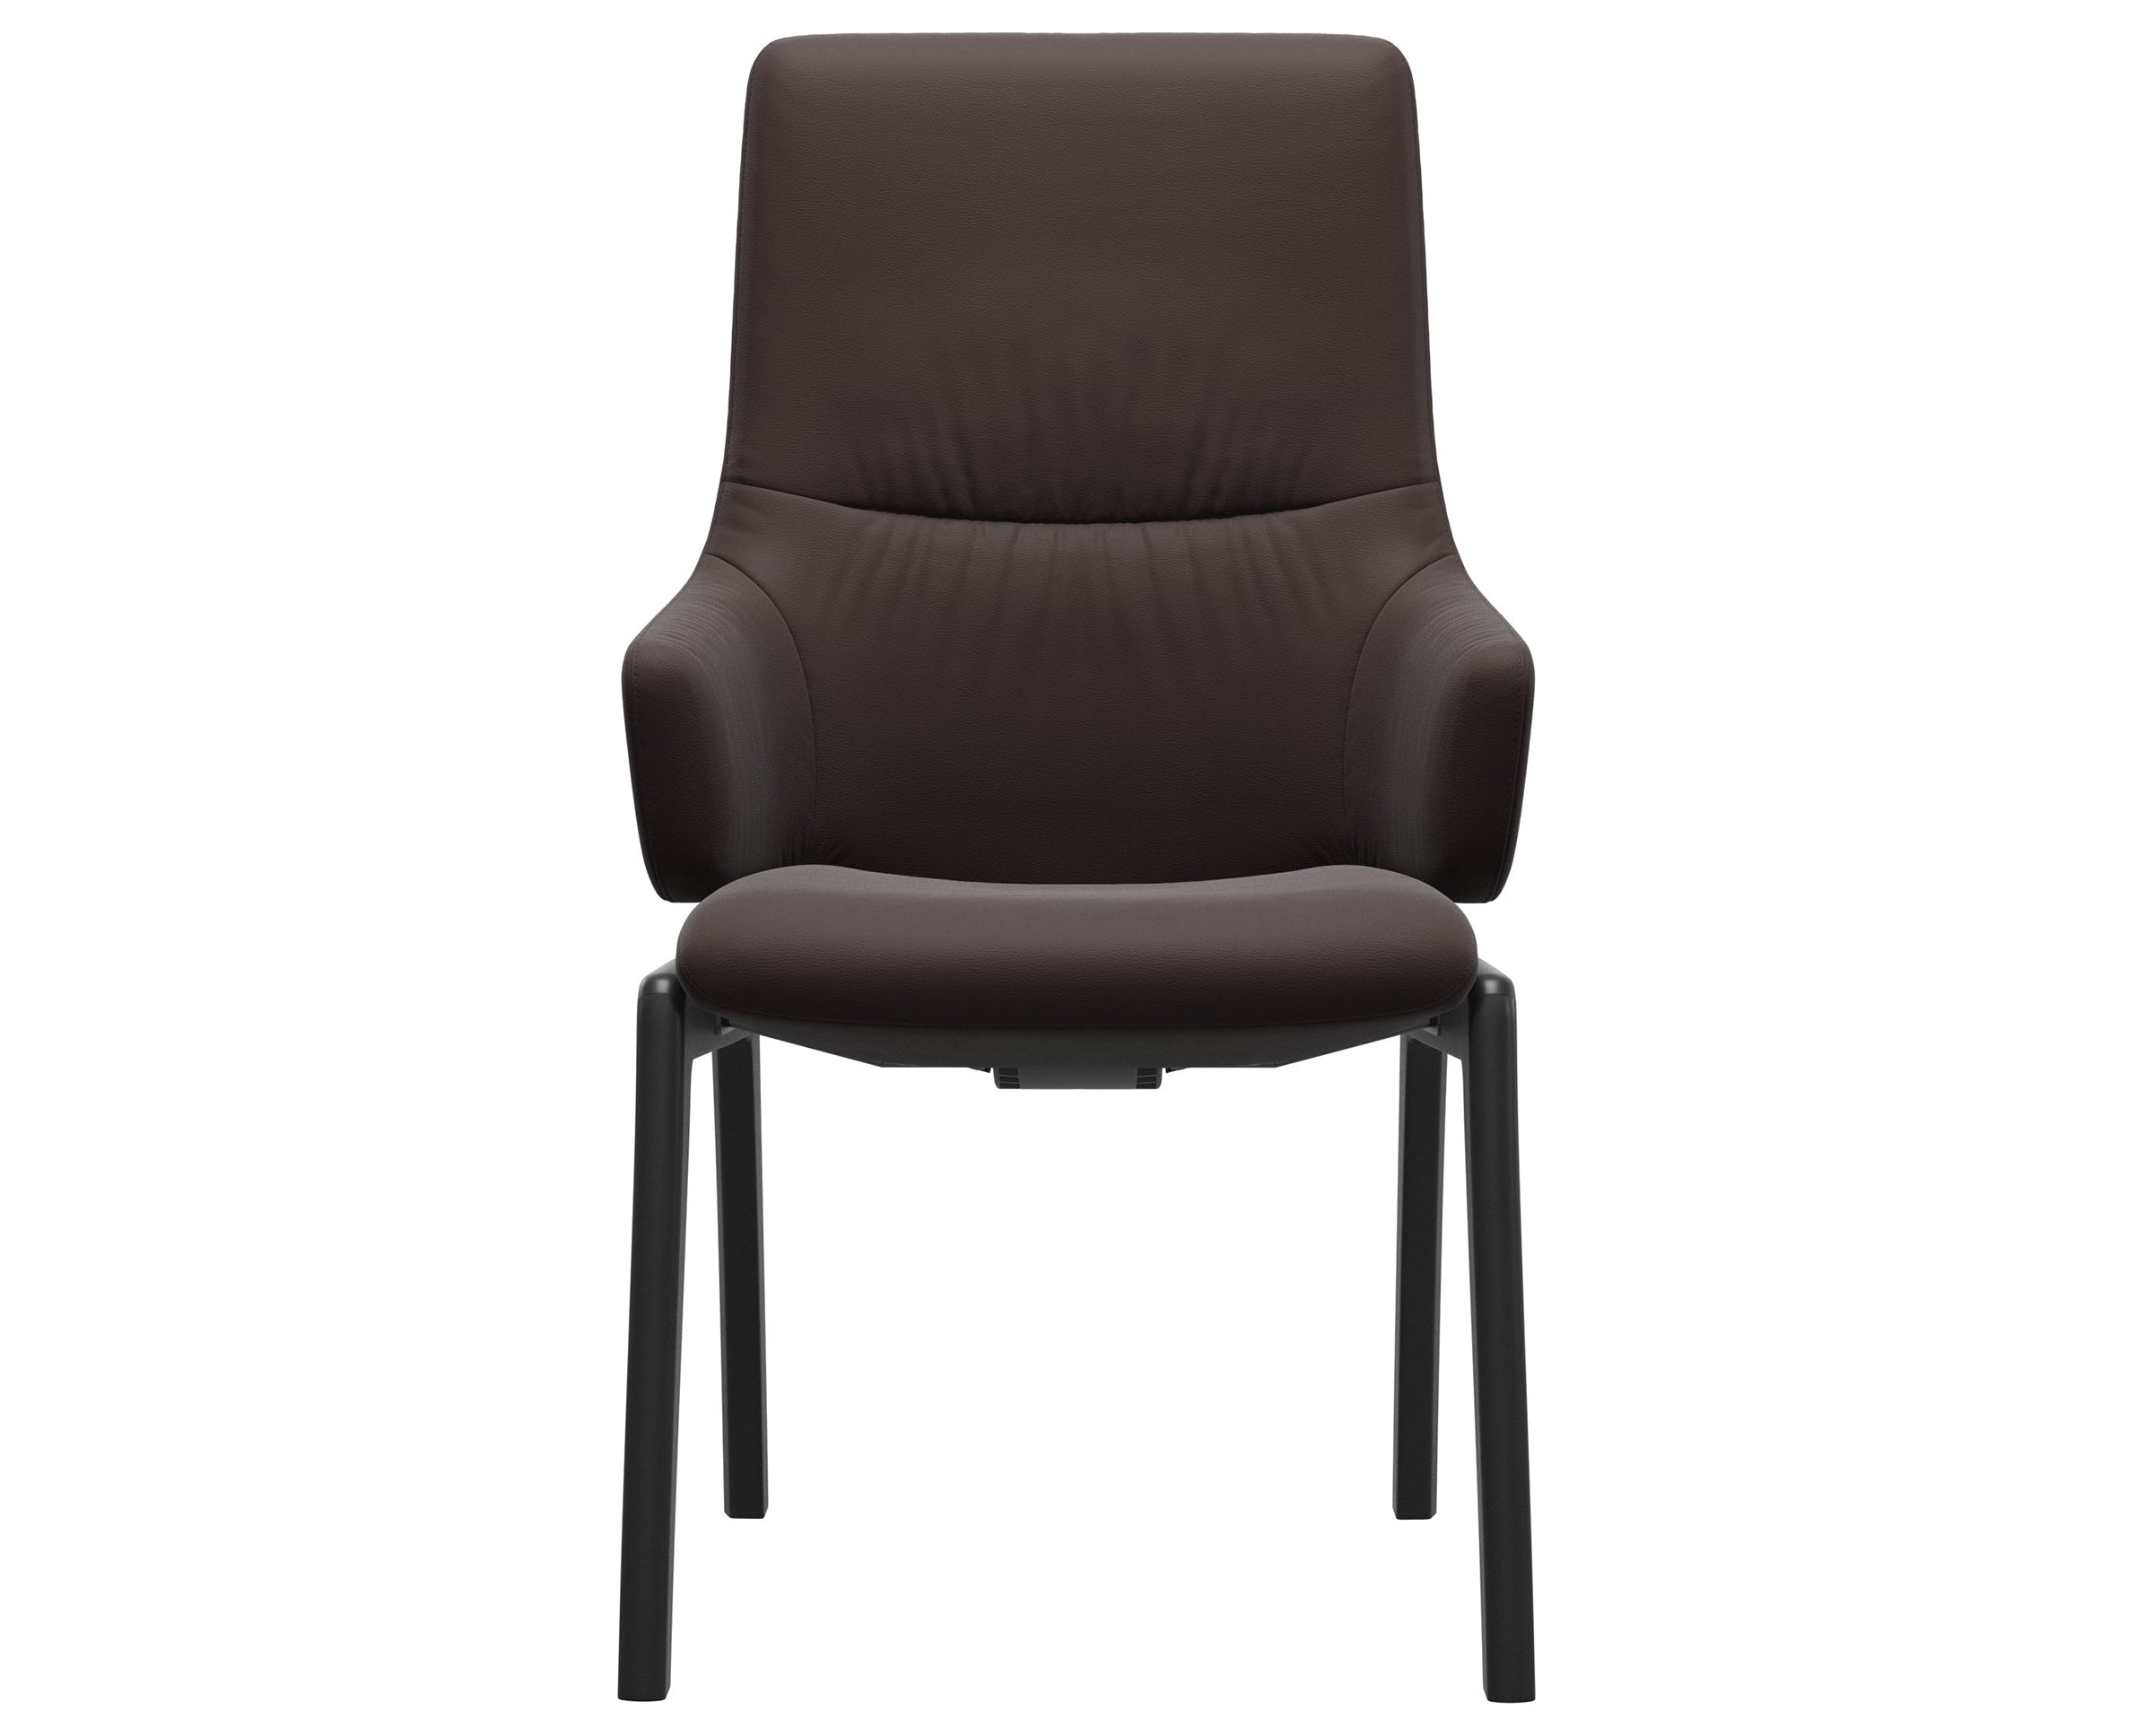 Paloma Leather Chocolate and Black Base | Stressless Mint High Back D100 Dining Chair w/Arms | Valley Ridge Furniture